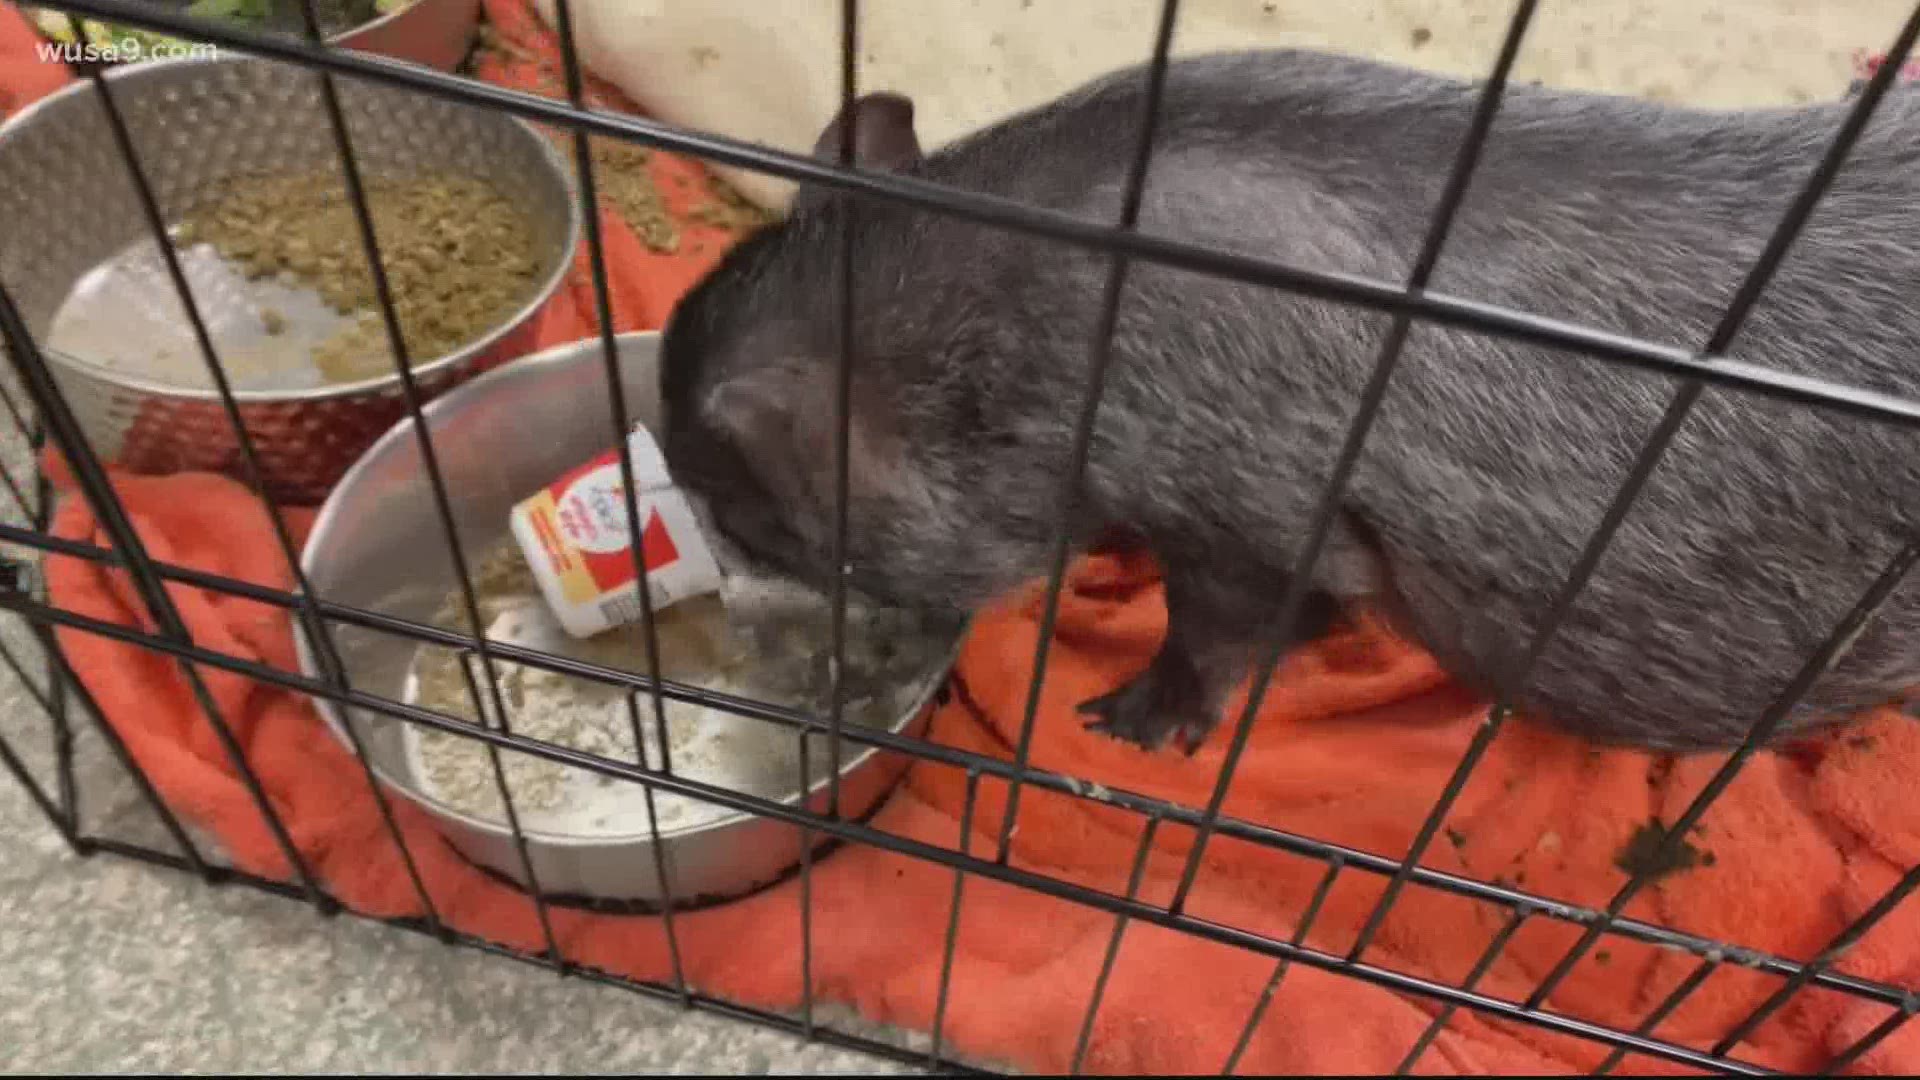 Lyla the potbellied pig is now in the care of D.C.’s Humane Rescue Alliance (HRA). She’s looking for a home, but HRA could use some help first.